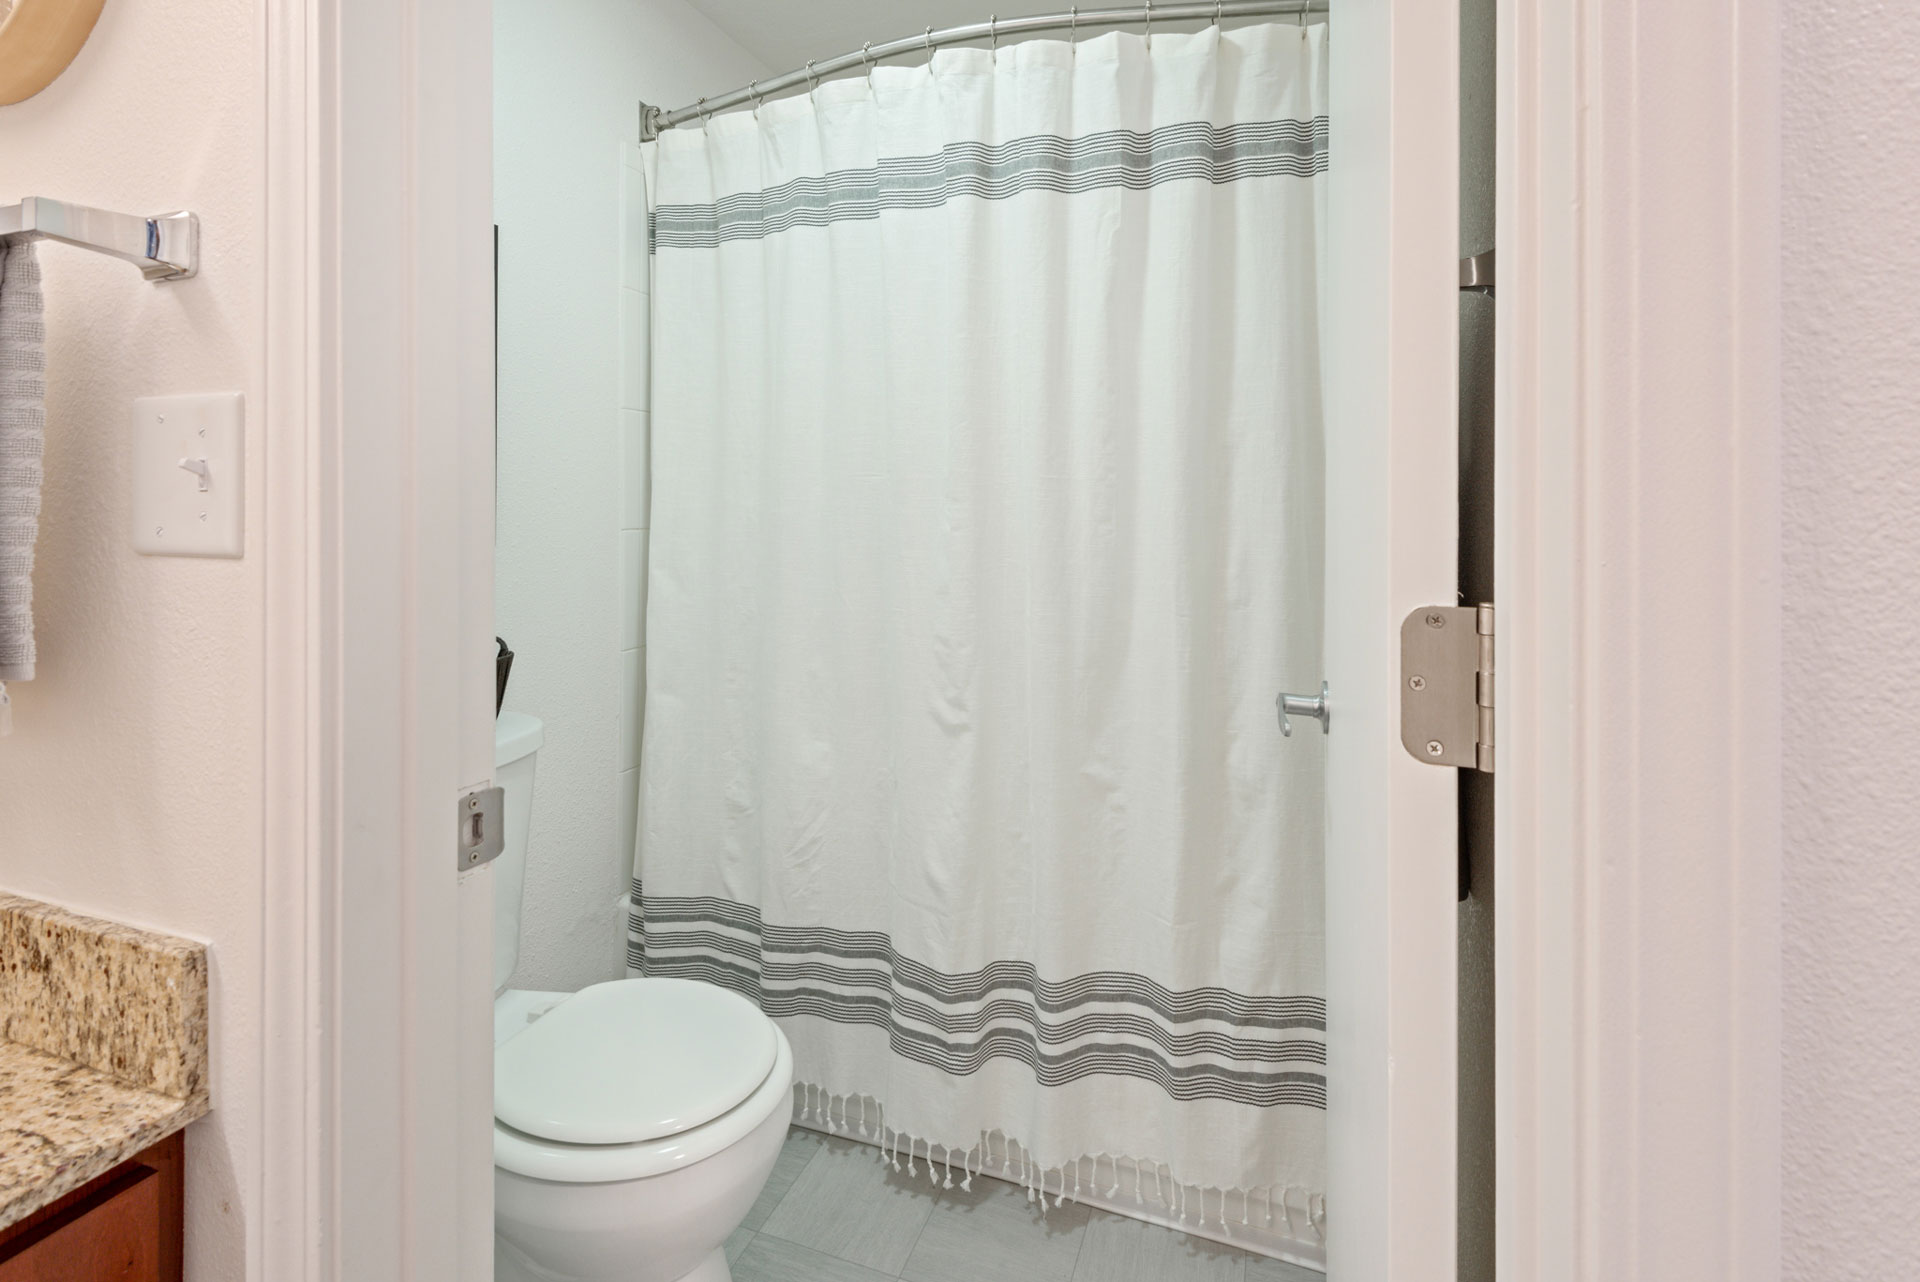 Tub shower with extended shower rod.